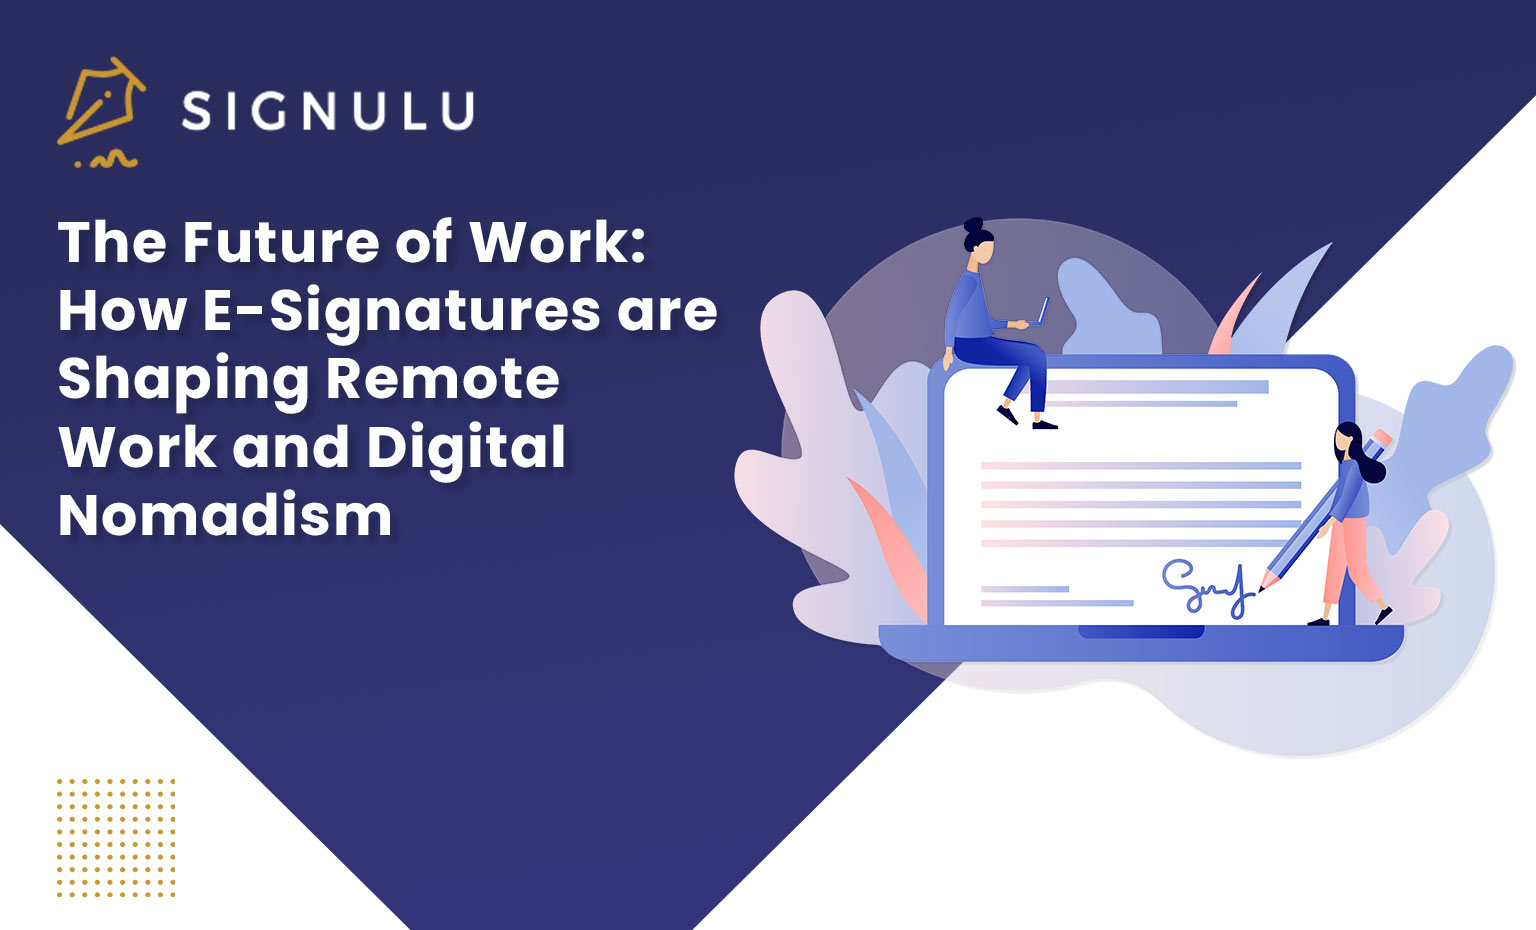 The Future of Work: How E-Signatures are Shaping Remote Work and Digital Nomadism